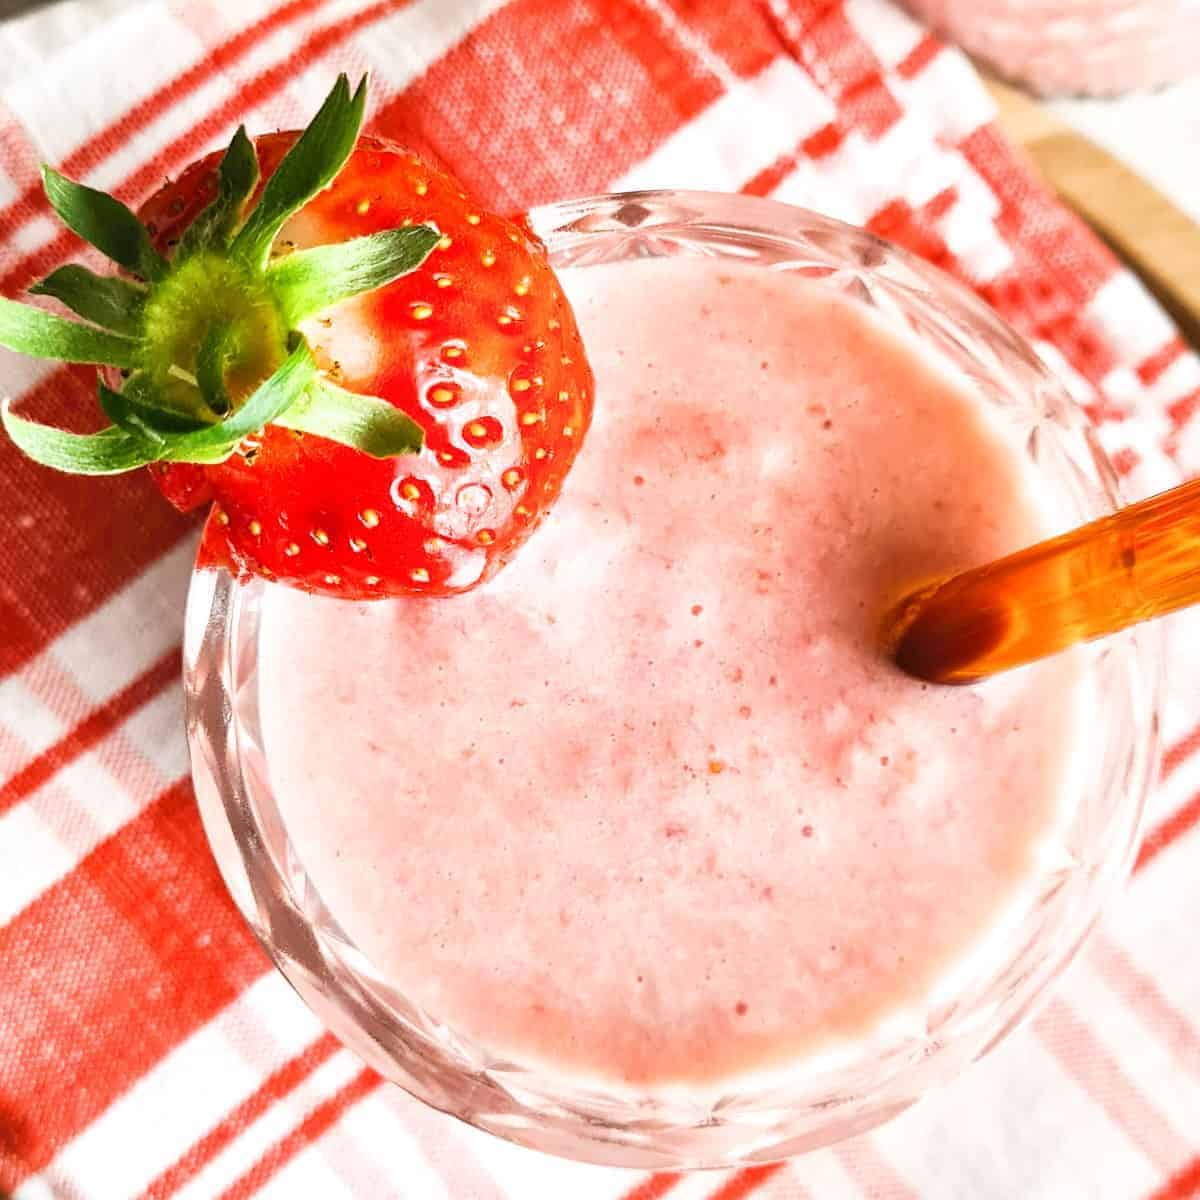 Strawberry Pineapple Smoothie with Banana